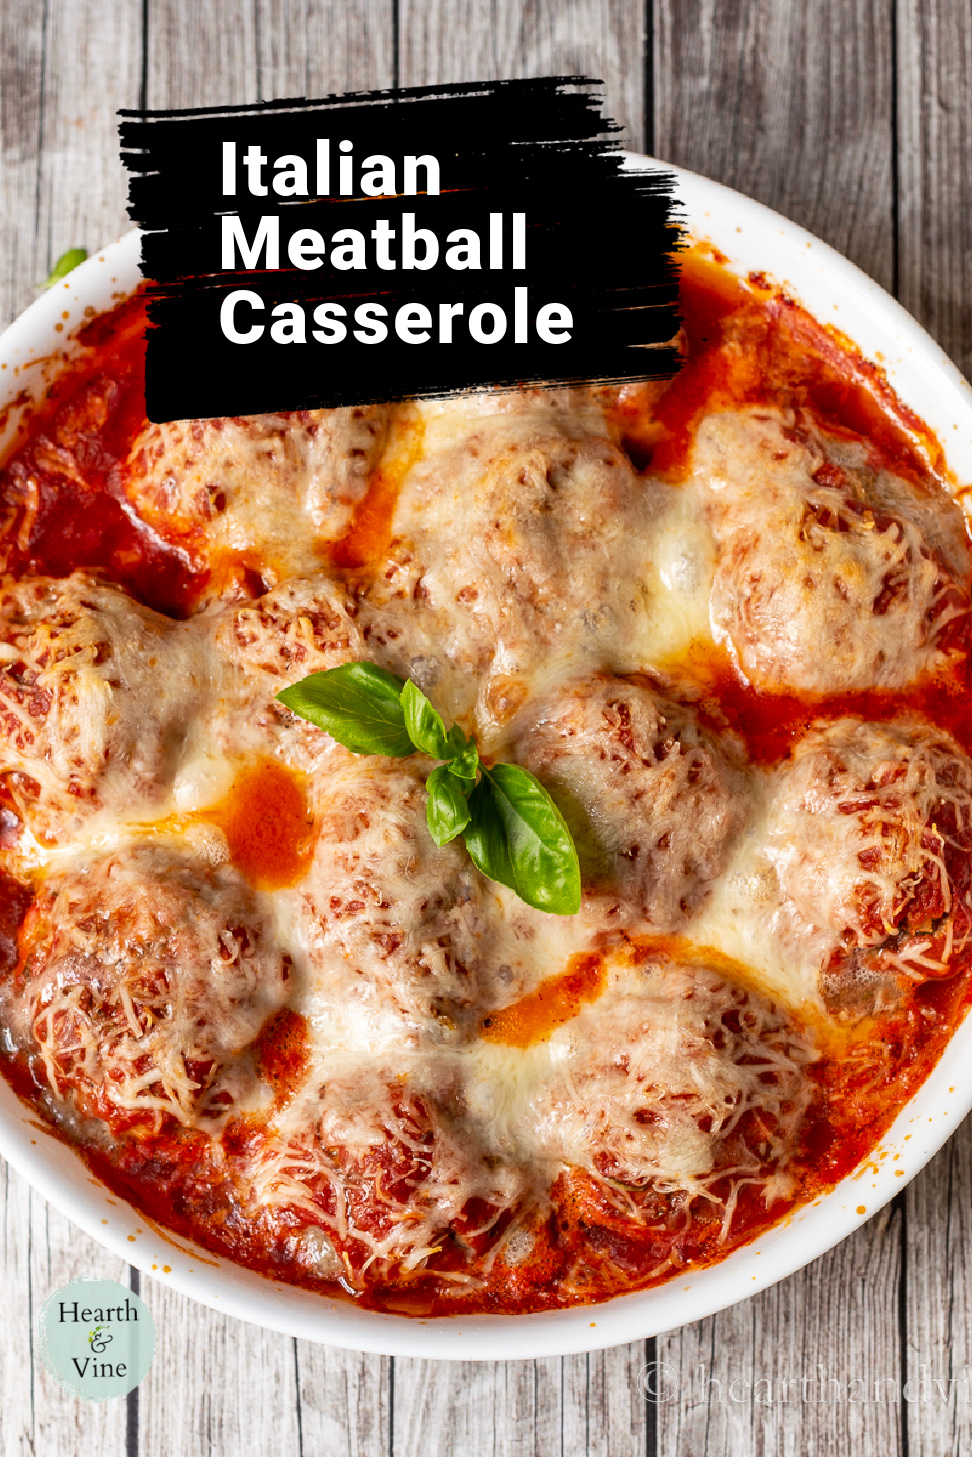 Meatball casserole in a white baking pan with a sprig of fresh basil in the center as garnish.